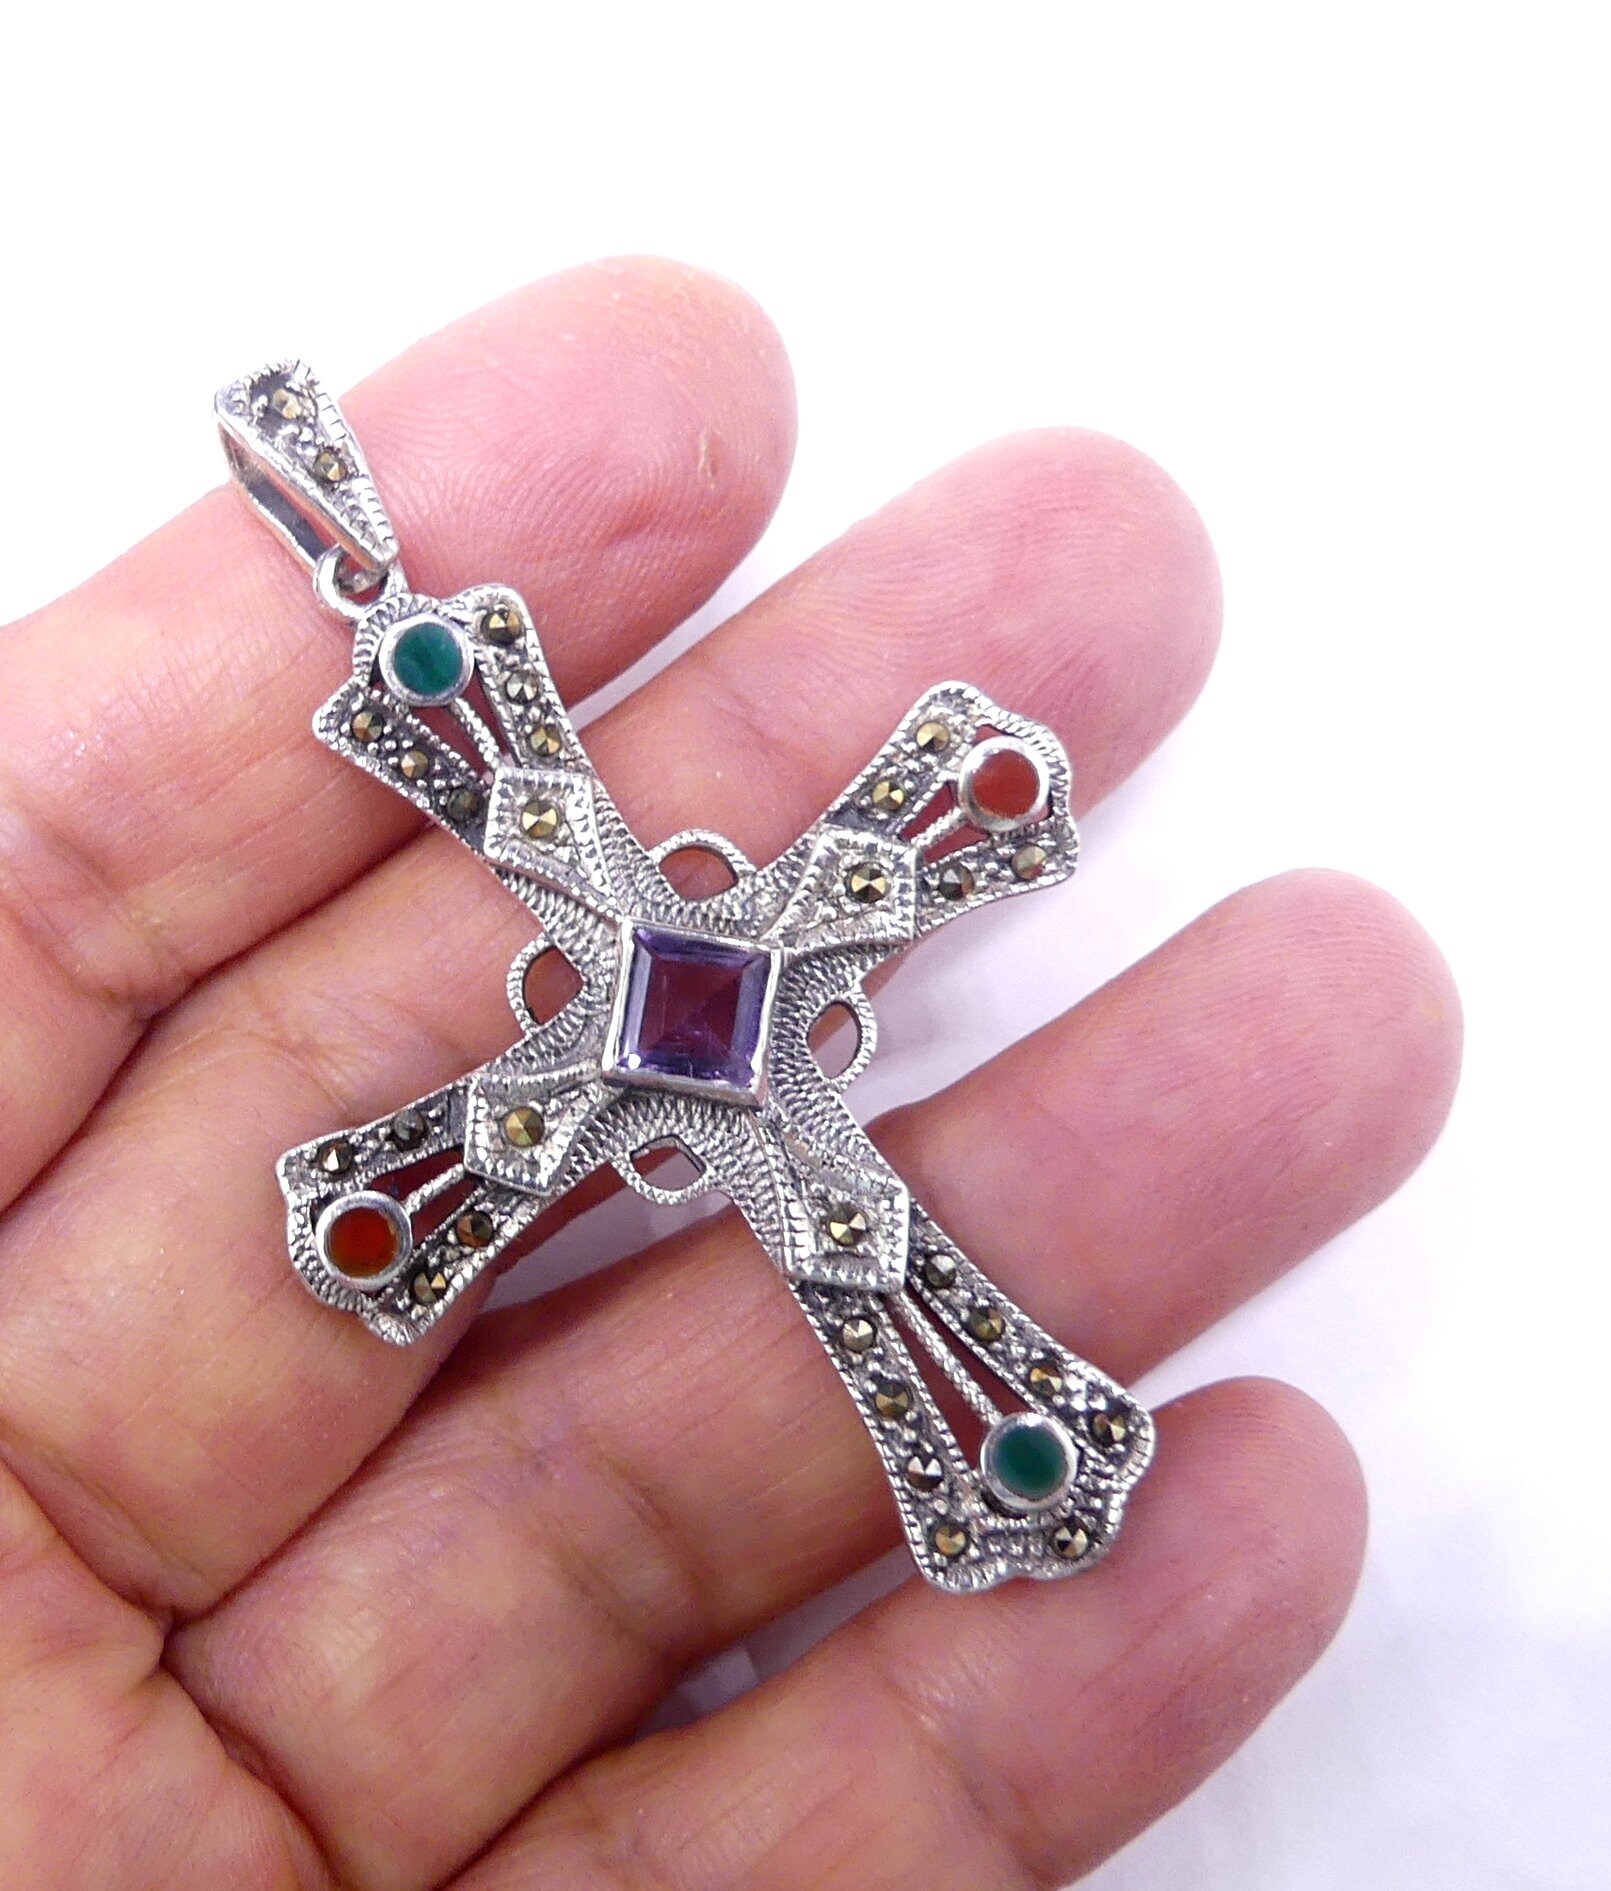 1x OXIDIZED STERLING SILVER MARCASITE CROSS CHANDELIER NECKLACE CONNECTOR #2244 